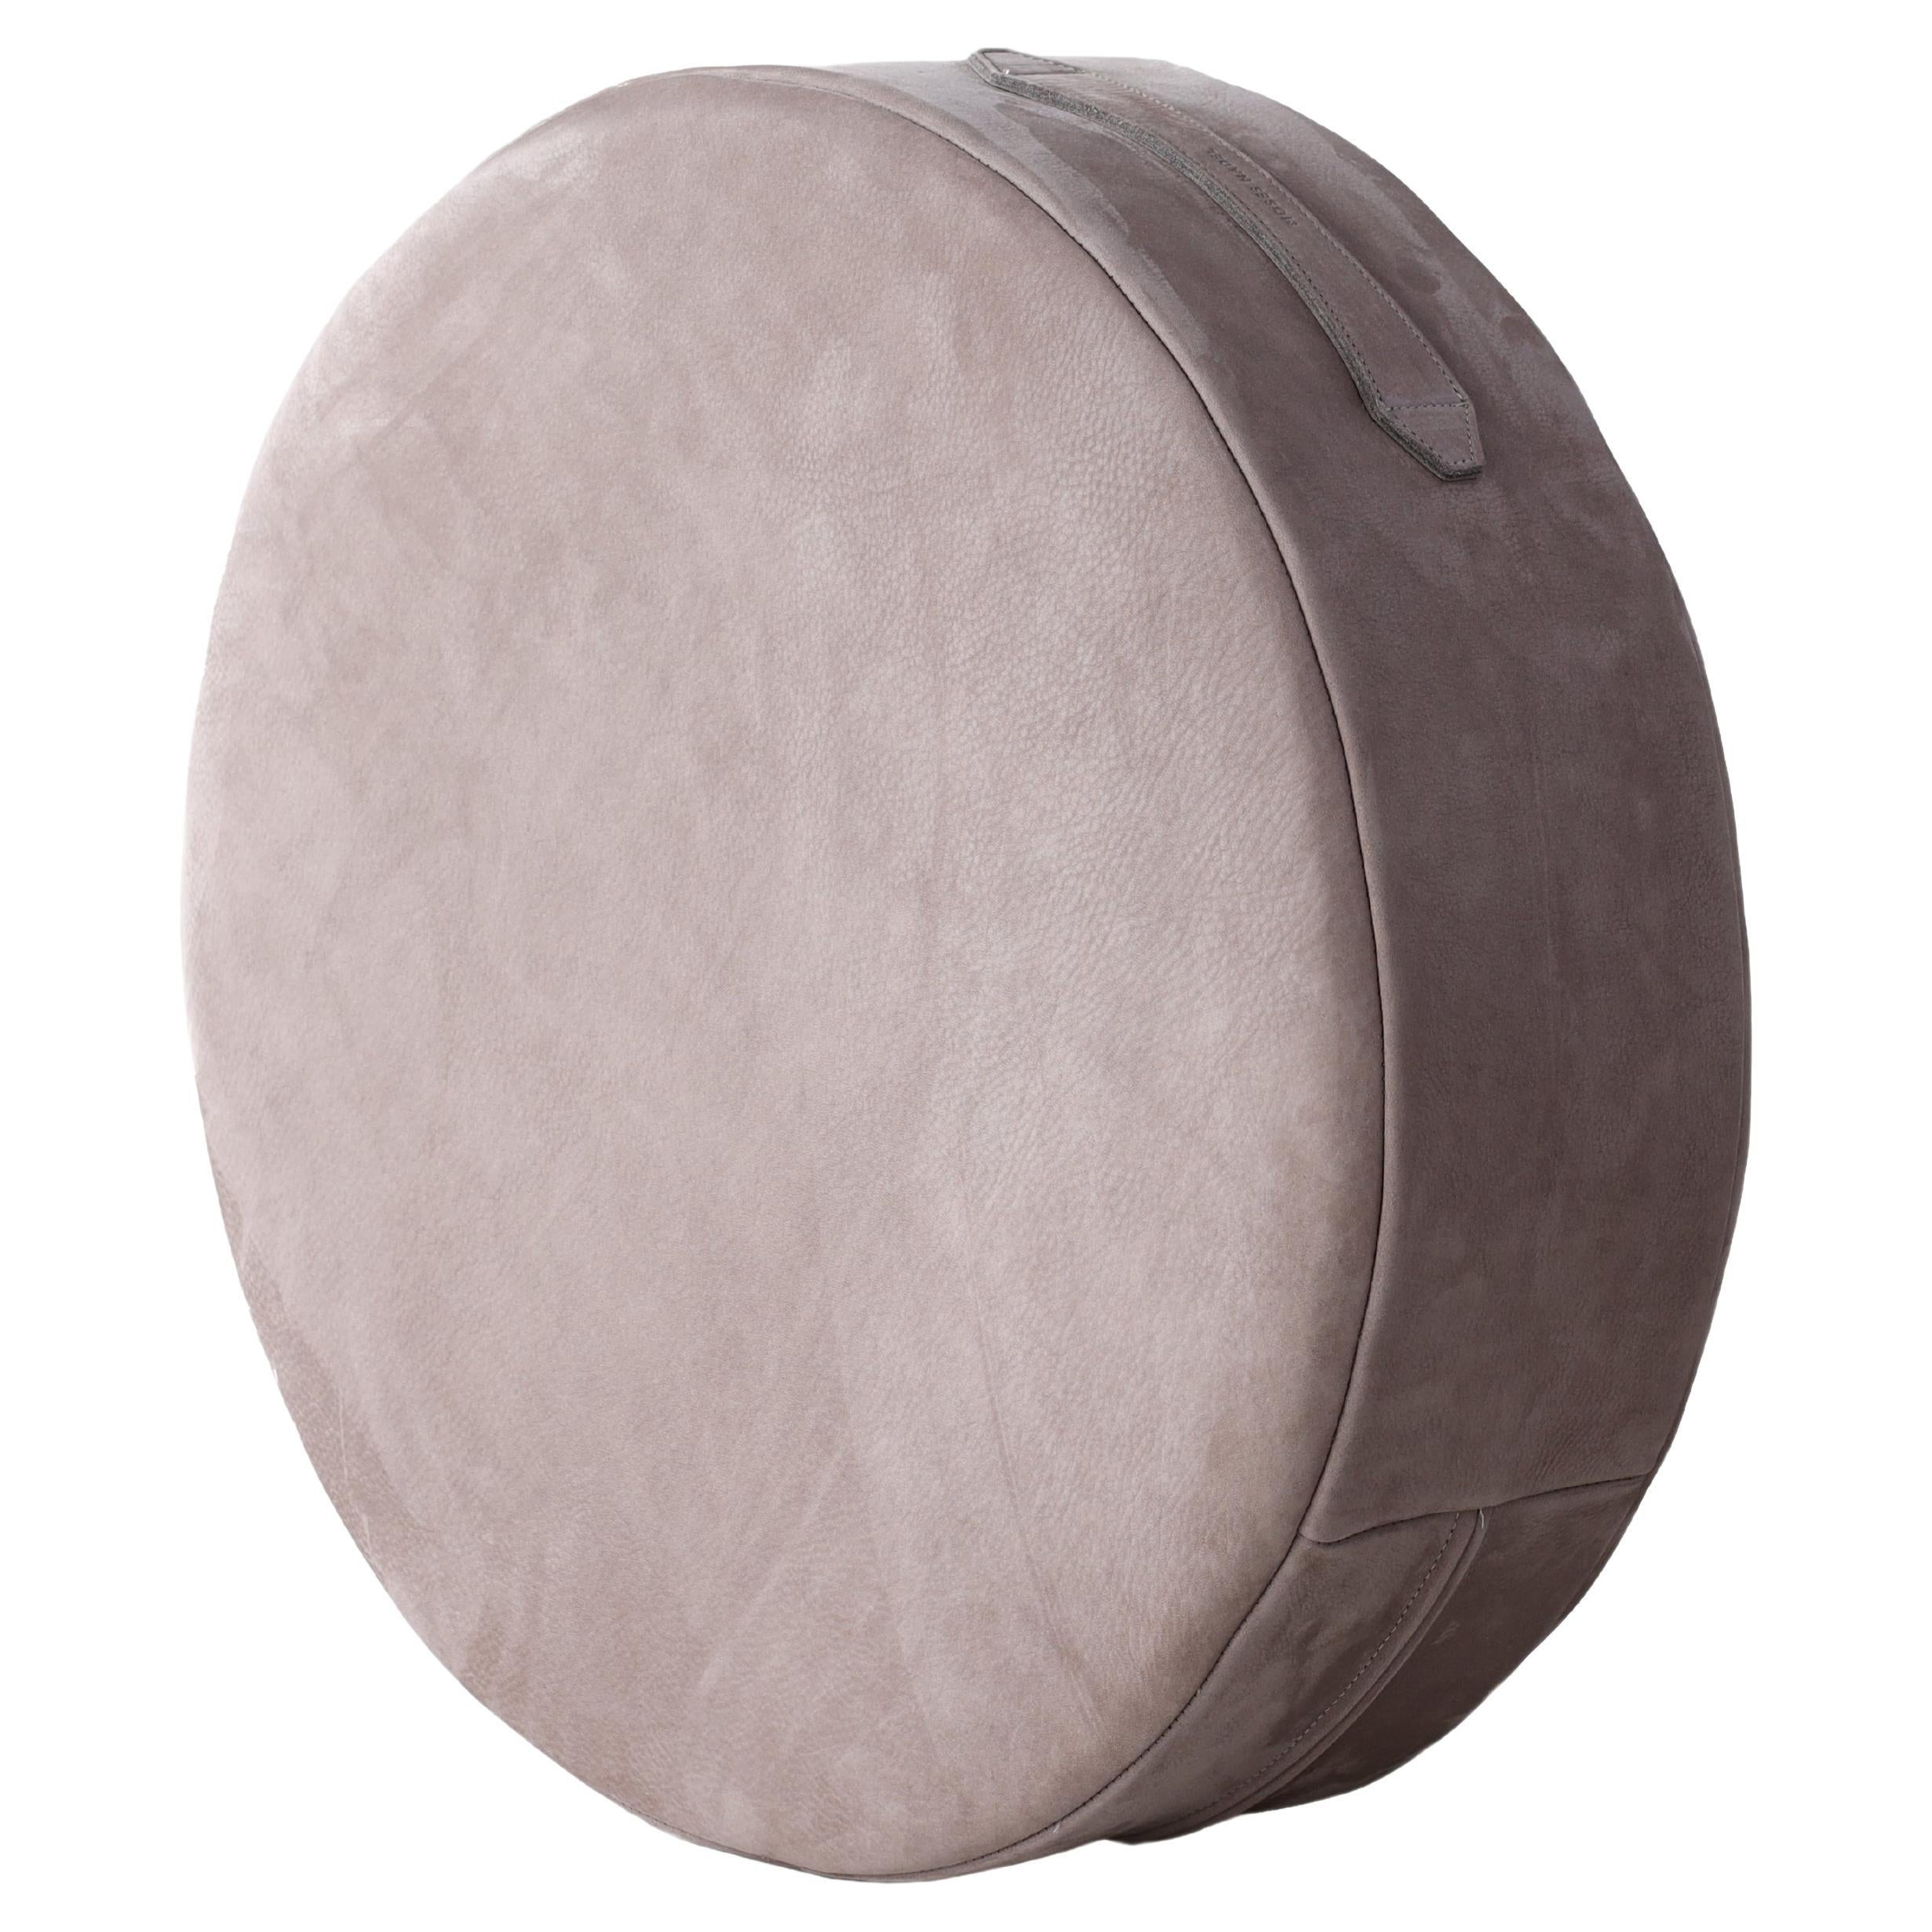 20"Ø x 5" Puck Floor Cushion in Storm Nubuck Leather by Moses Nadel